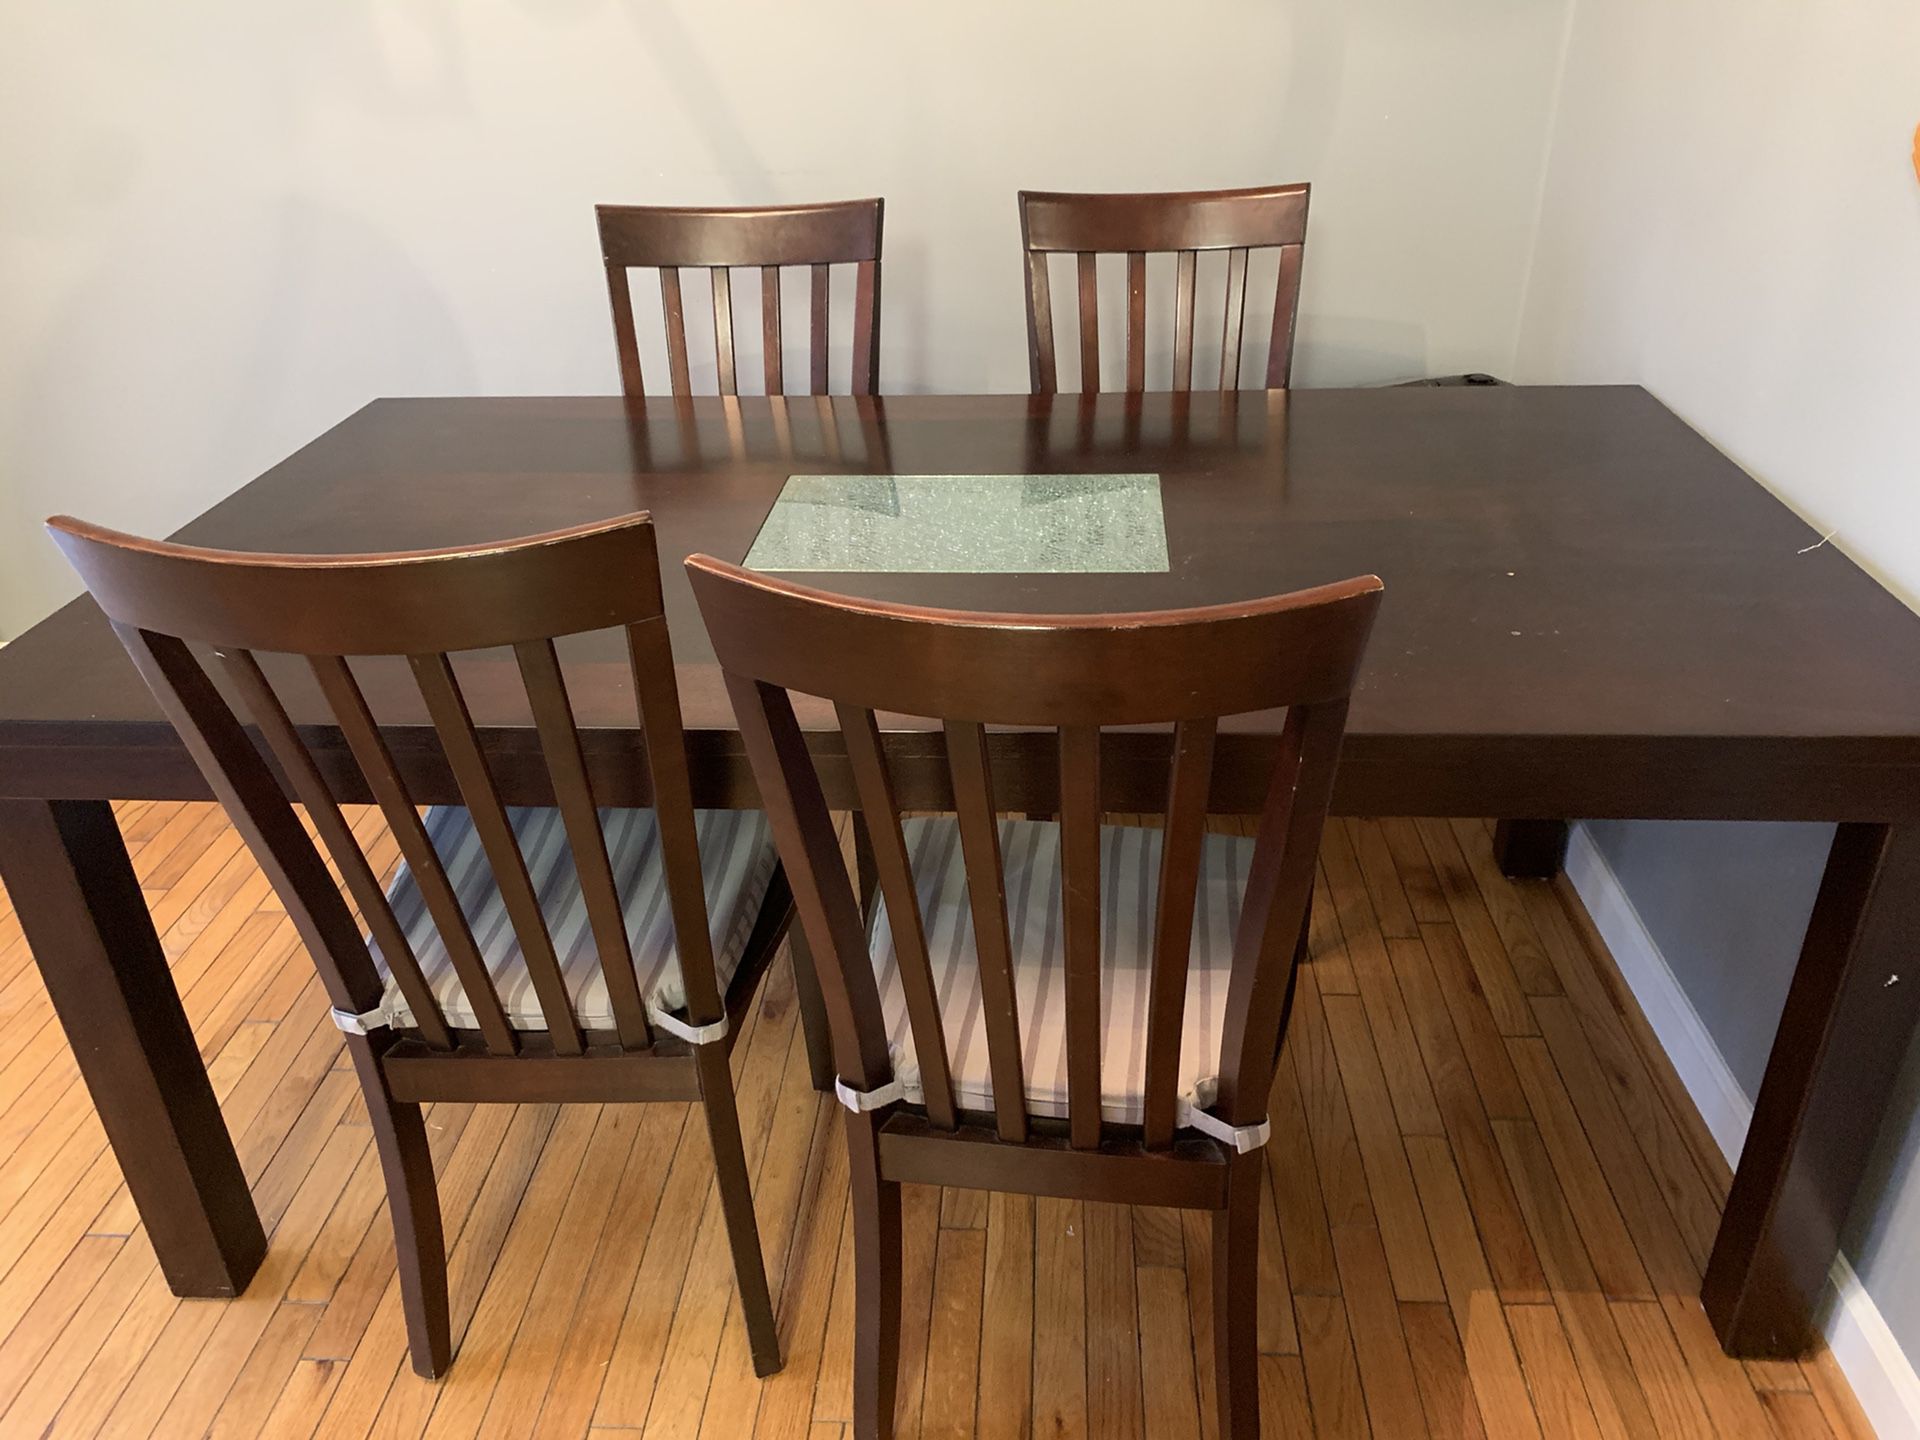 Nice kitchen table for sale!